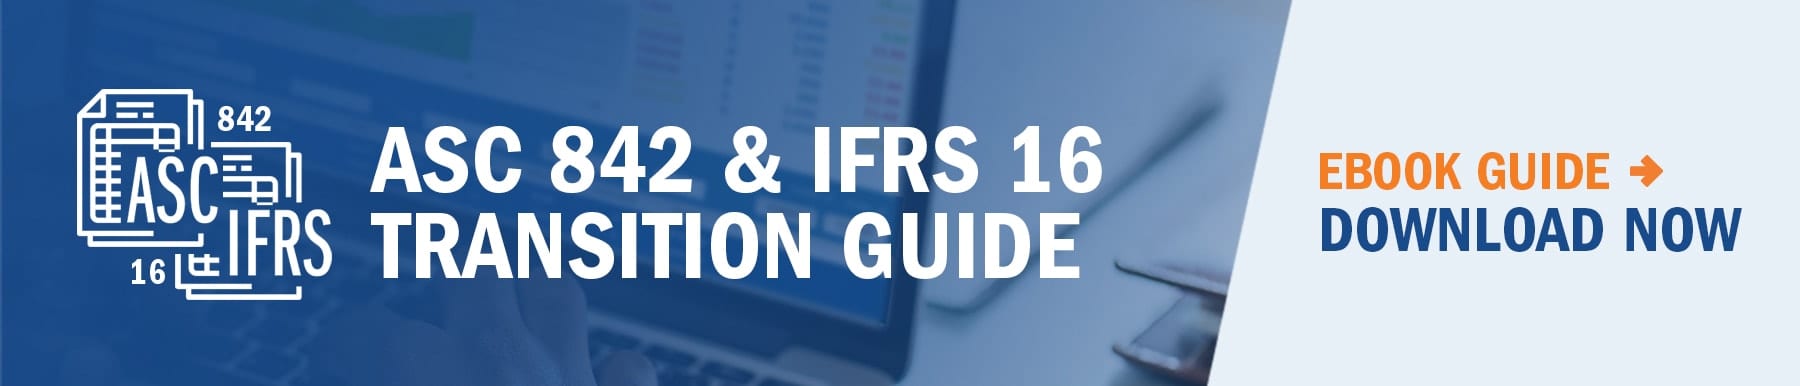 ASC 842 and IFRS 16 Transition Guide